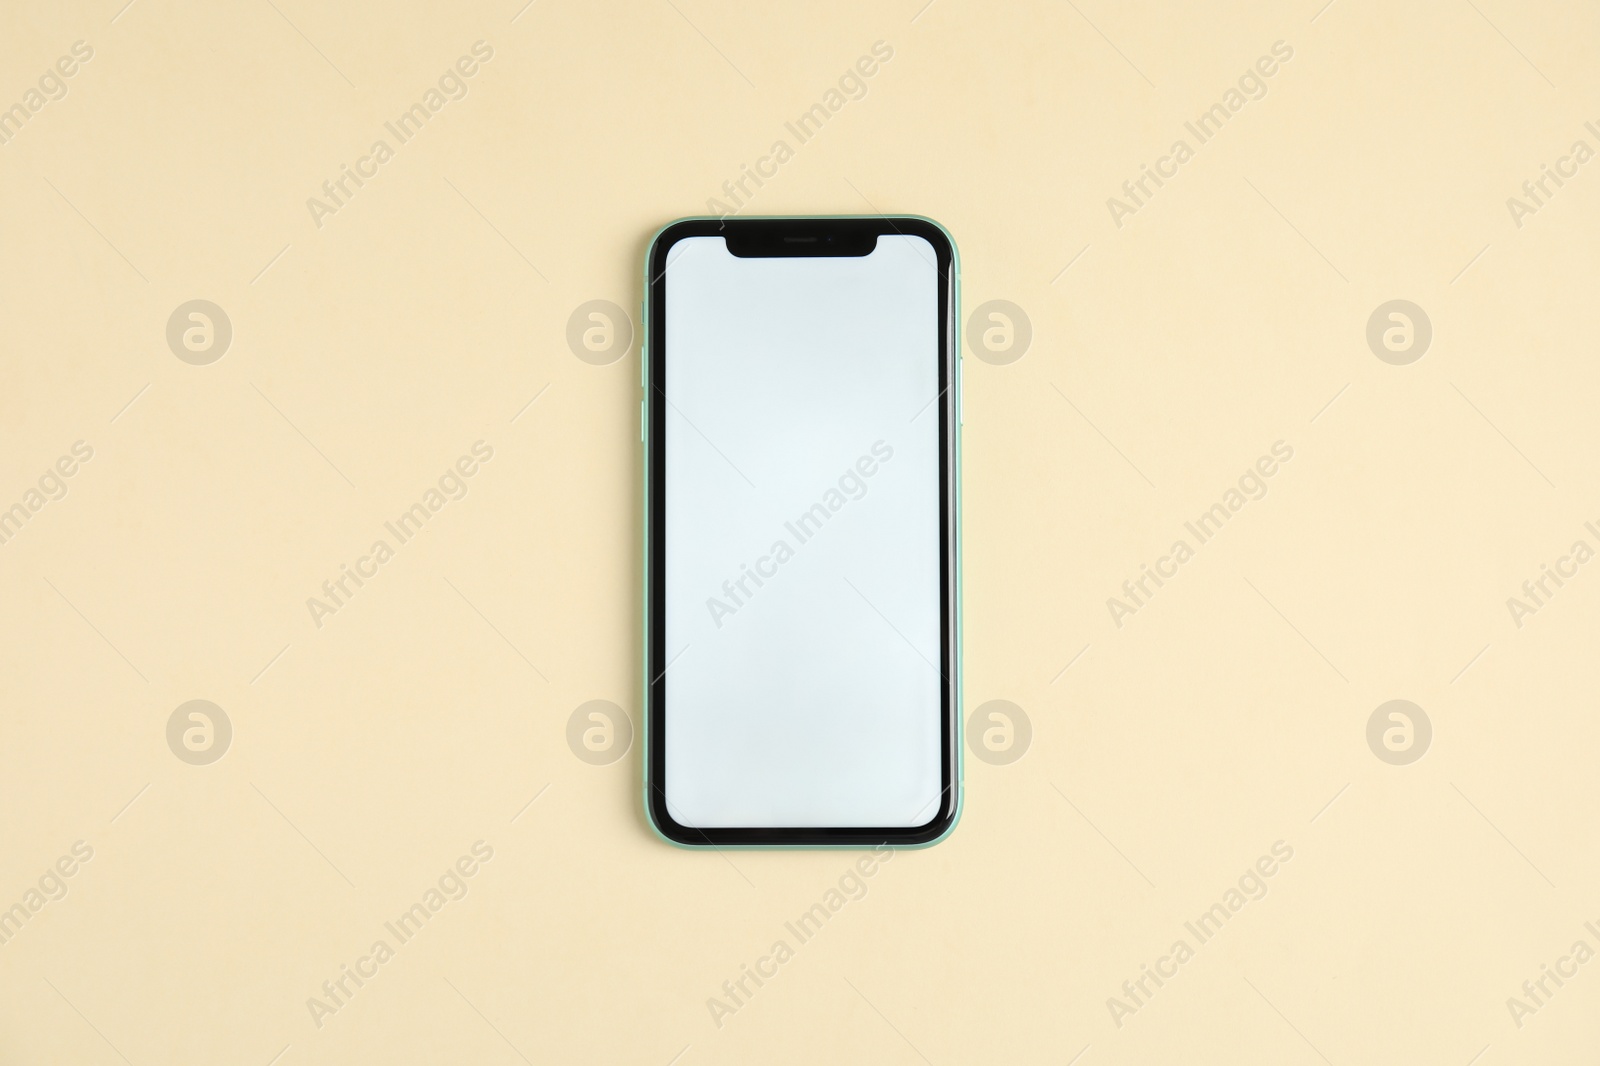 Photo of MYKOLAIV, UKRAINE - JULY 10, 2020: Iphone 11 with blank screen on beige background, top view. Mockup for design